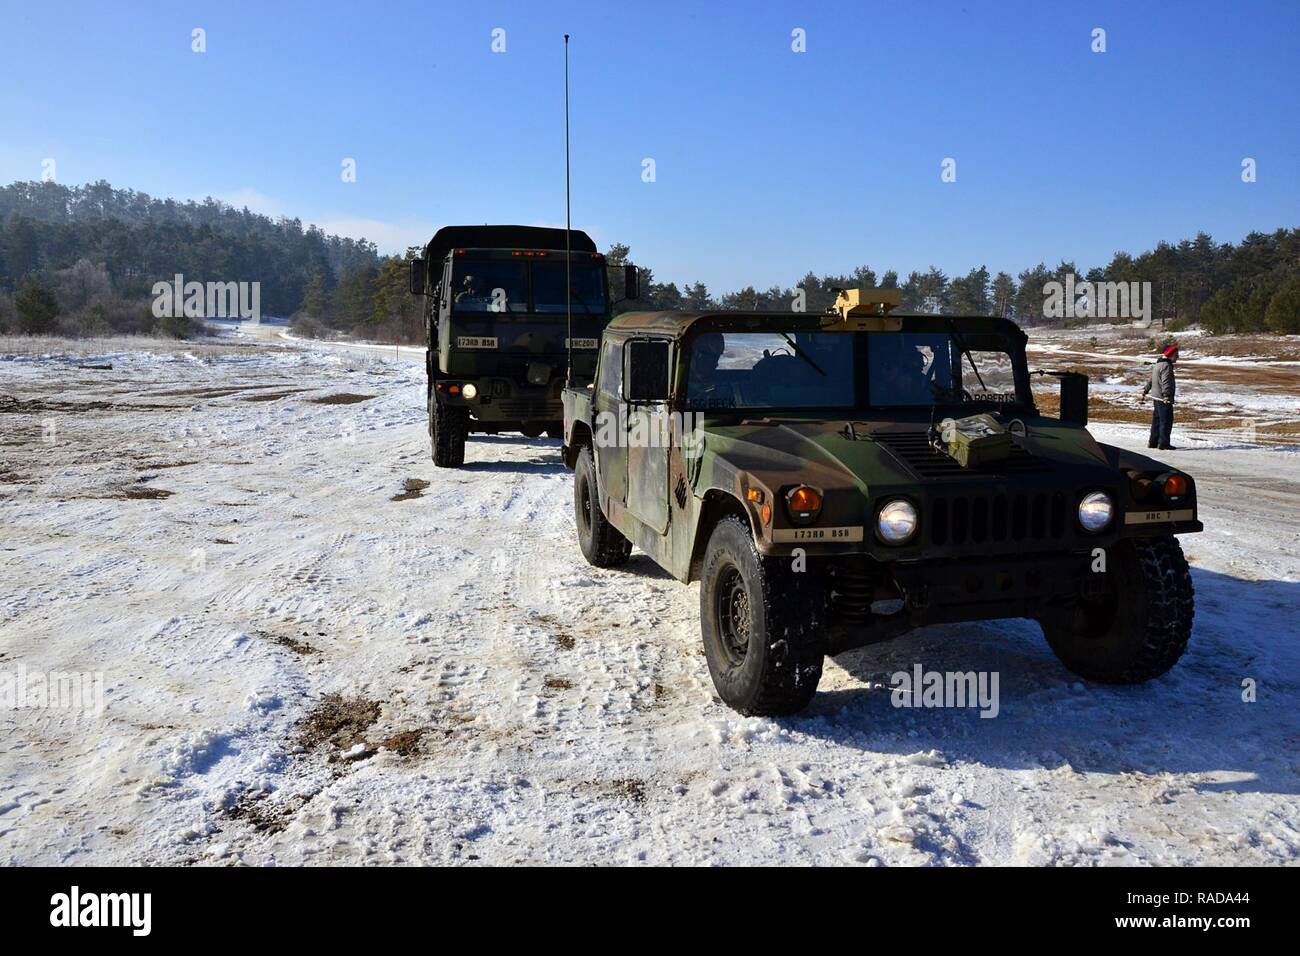 U.S. Army paratroopers from the 173rd Brigade Support Battalion, 173rd Airborne Brigade, conduct driver’s training on tactical vehicles in extreme winter conditions during exercise Lipizzaner III in Pocek, Slovenia, Jan. 29, 2017. Lipizzaner is a combined squad-level training exercise in preparation for platoon evaluation, and to validate battalion-level deployment procedures. Stock Photo